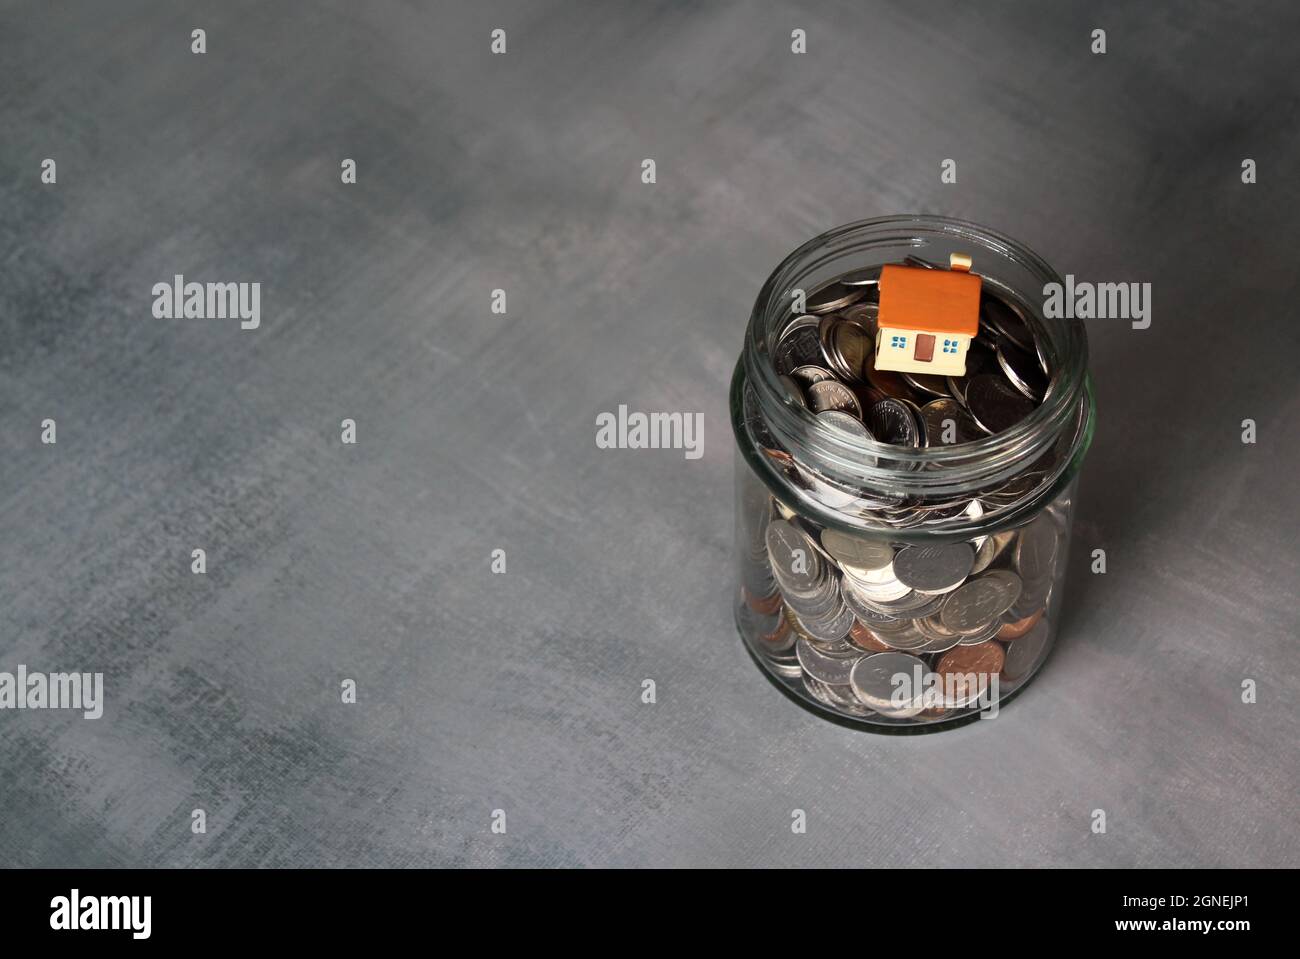 Real estate, property and financial concept. Close up image of coins in glass jar with miniature house. Copy space for text Stock Photo